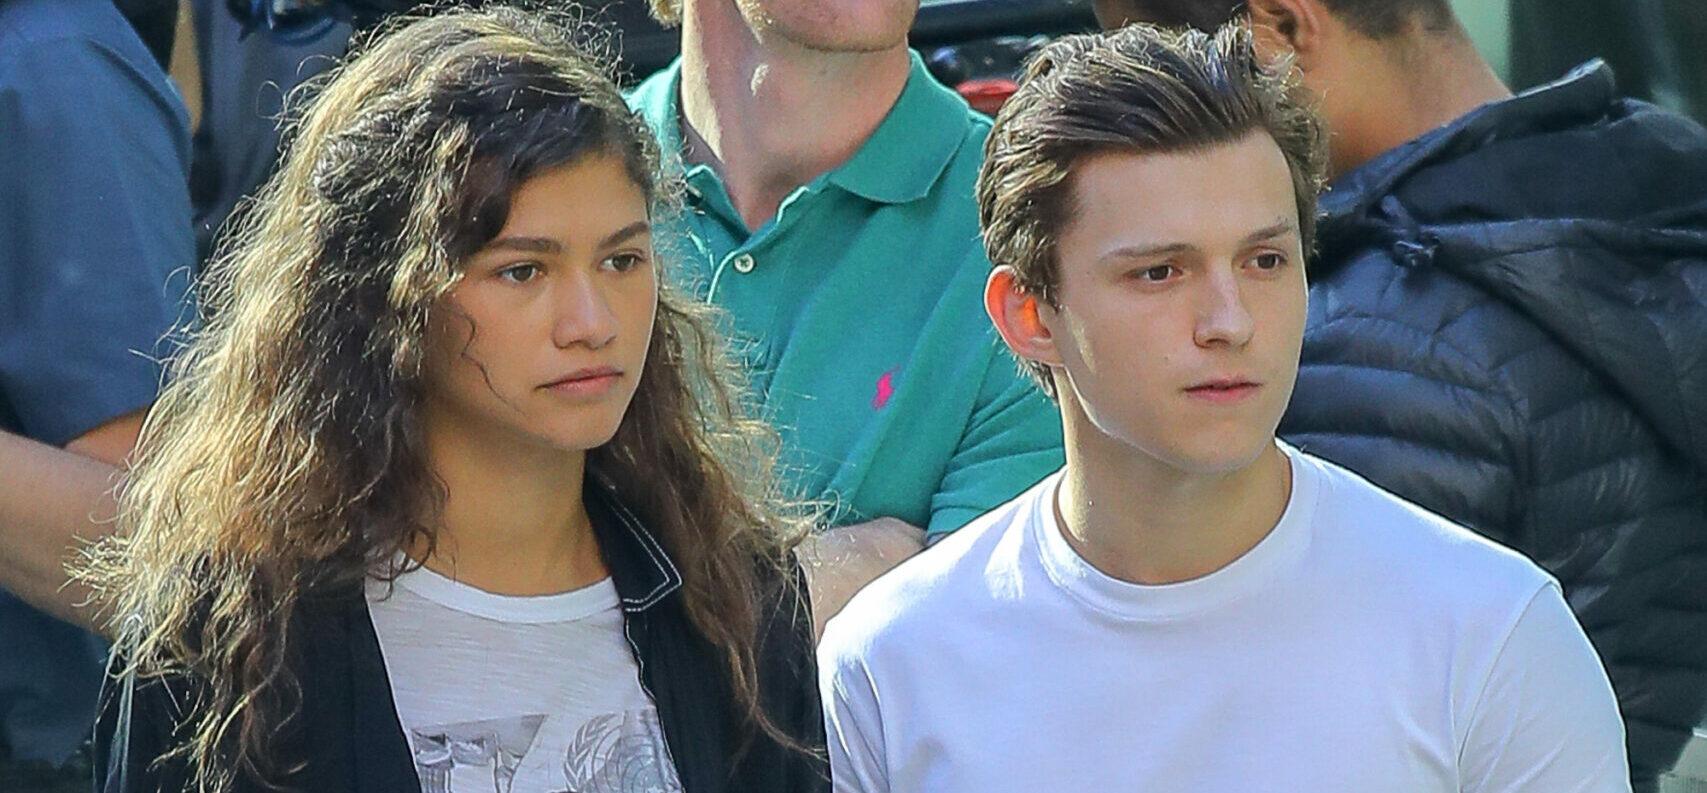 Zendaya and Tom Holland seen on break while filming Spider-Man Far From Home in New York City